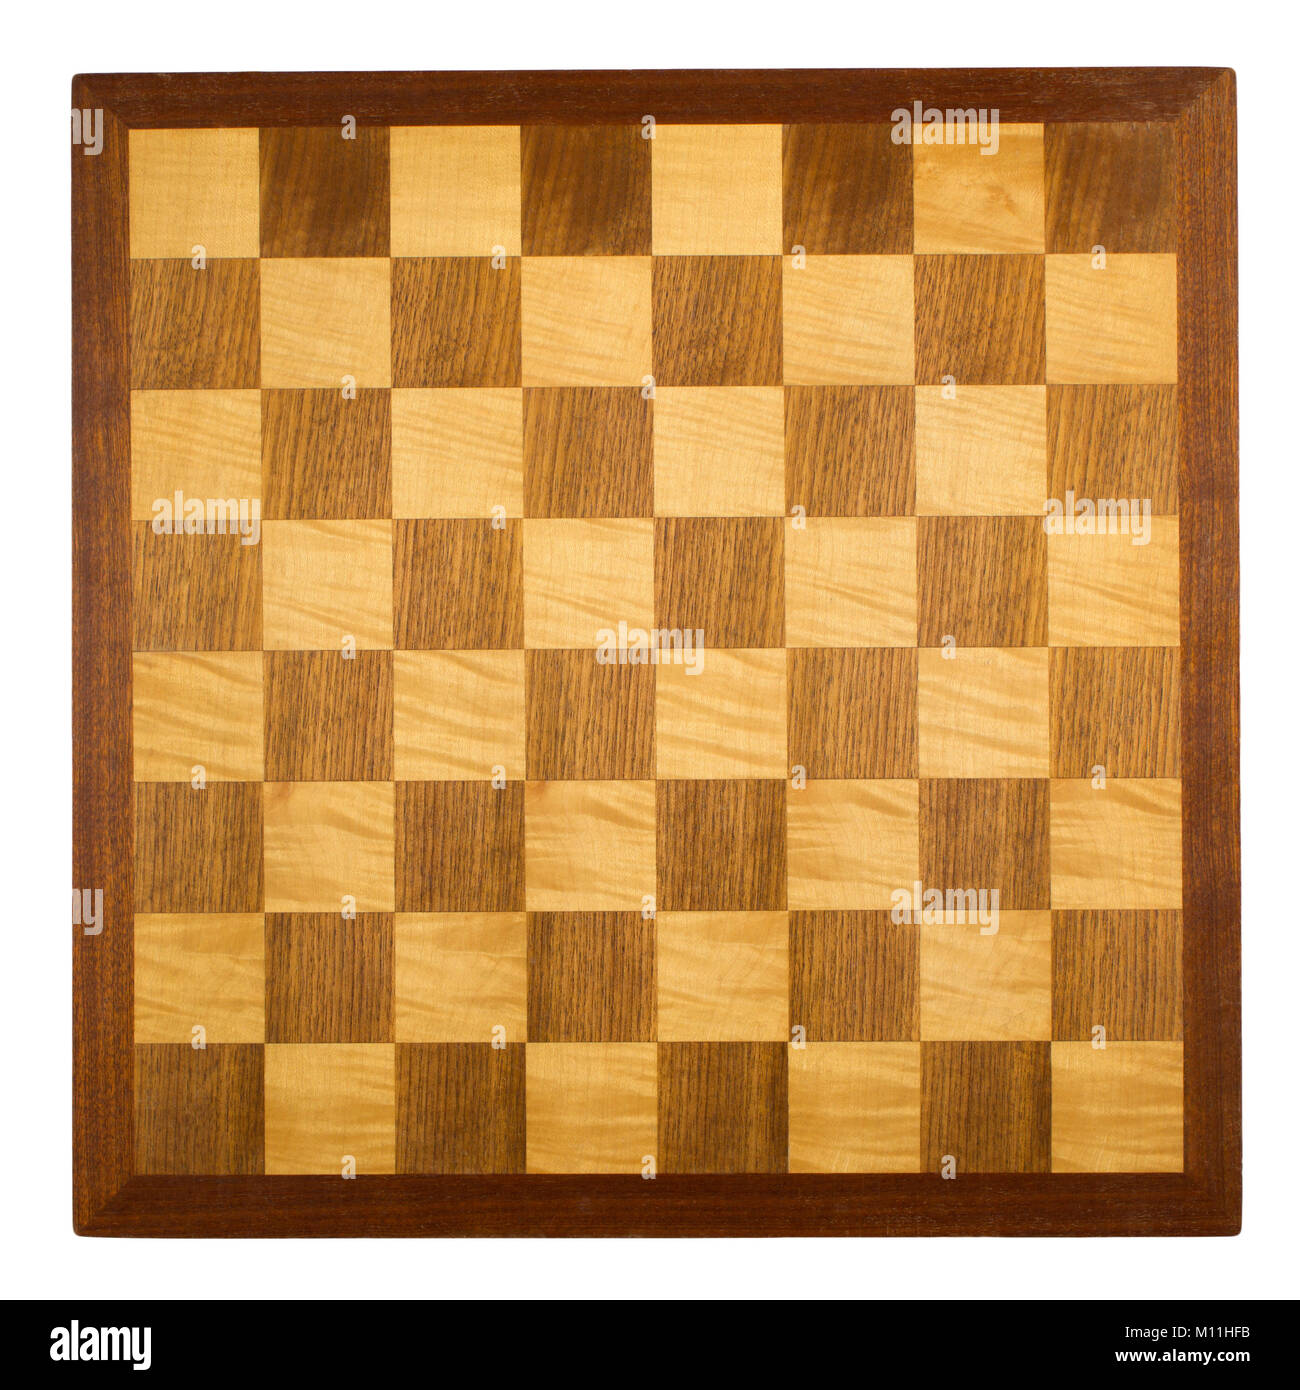 Old wooden chess board on white Stock Photo